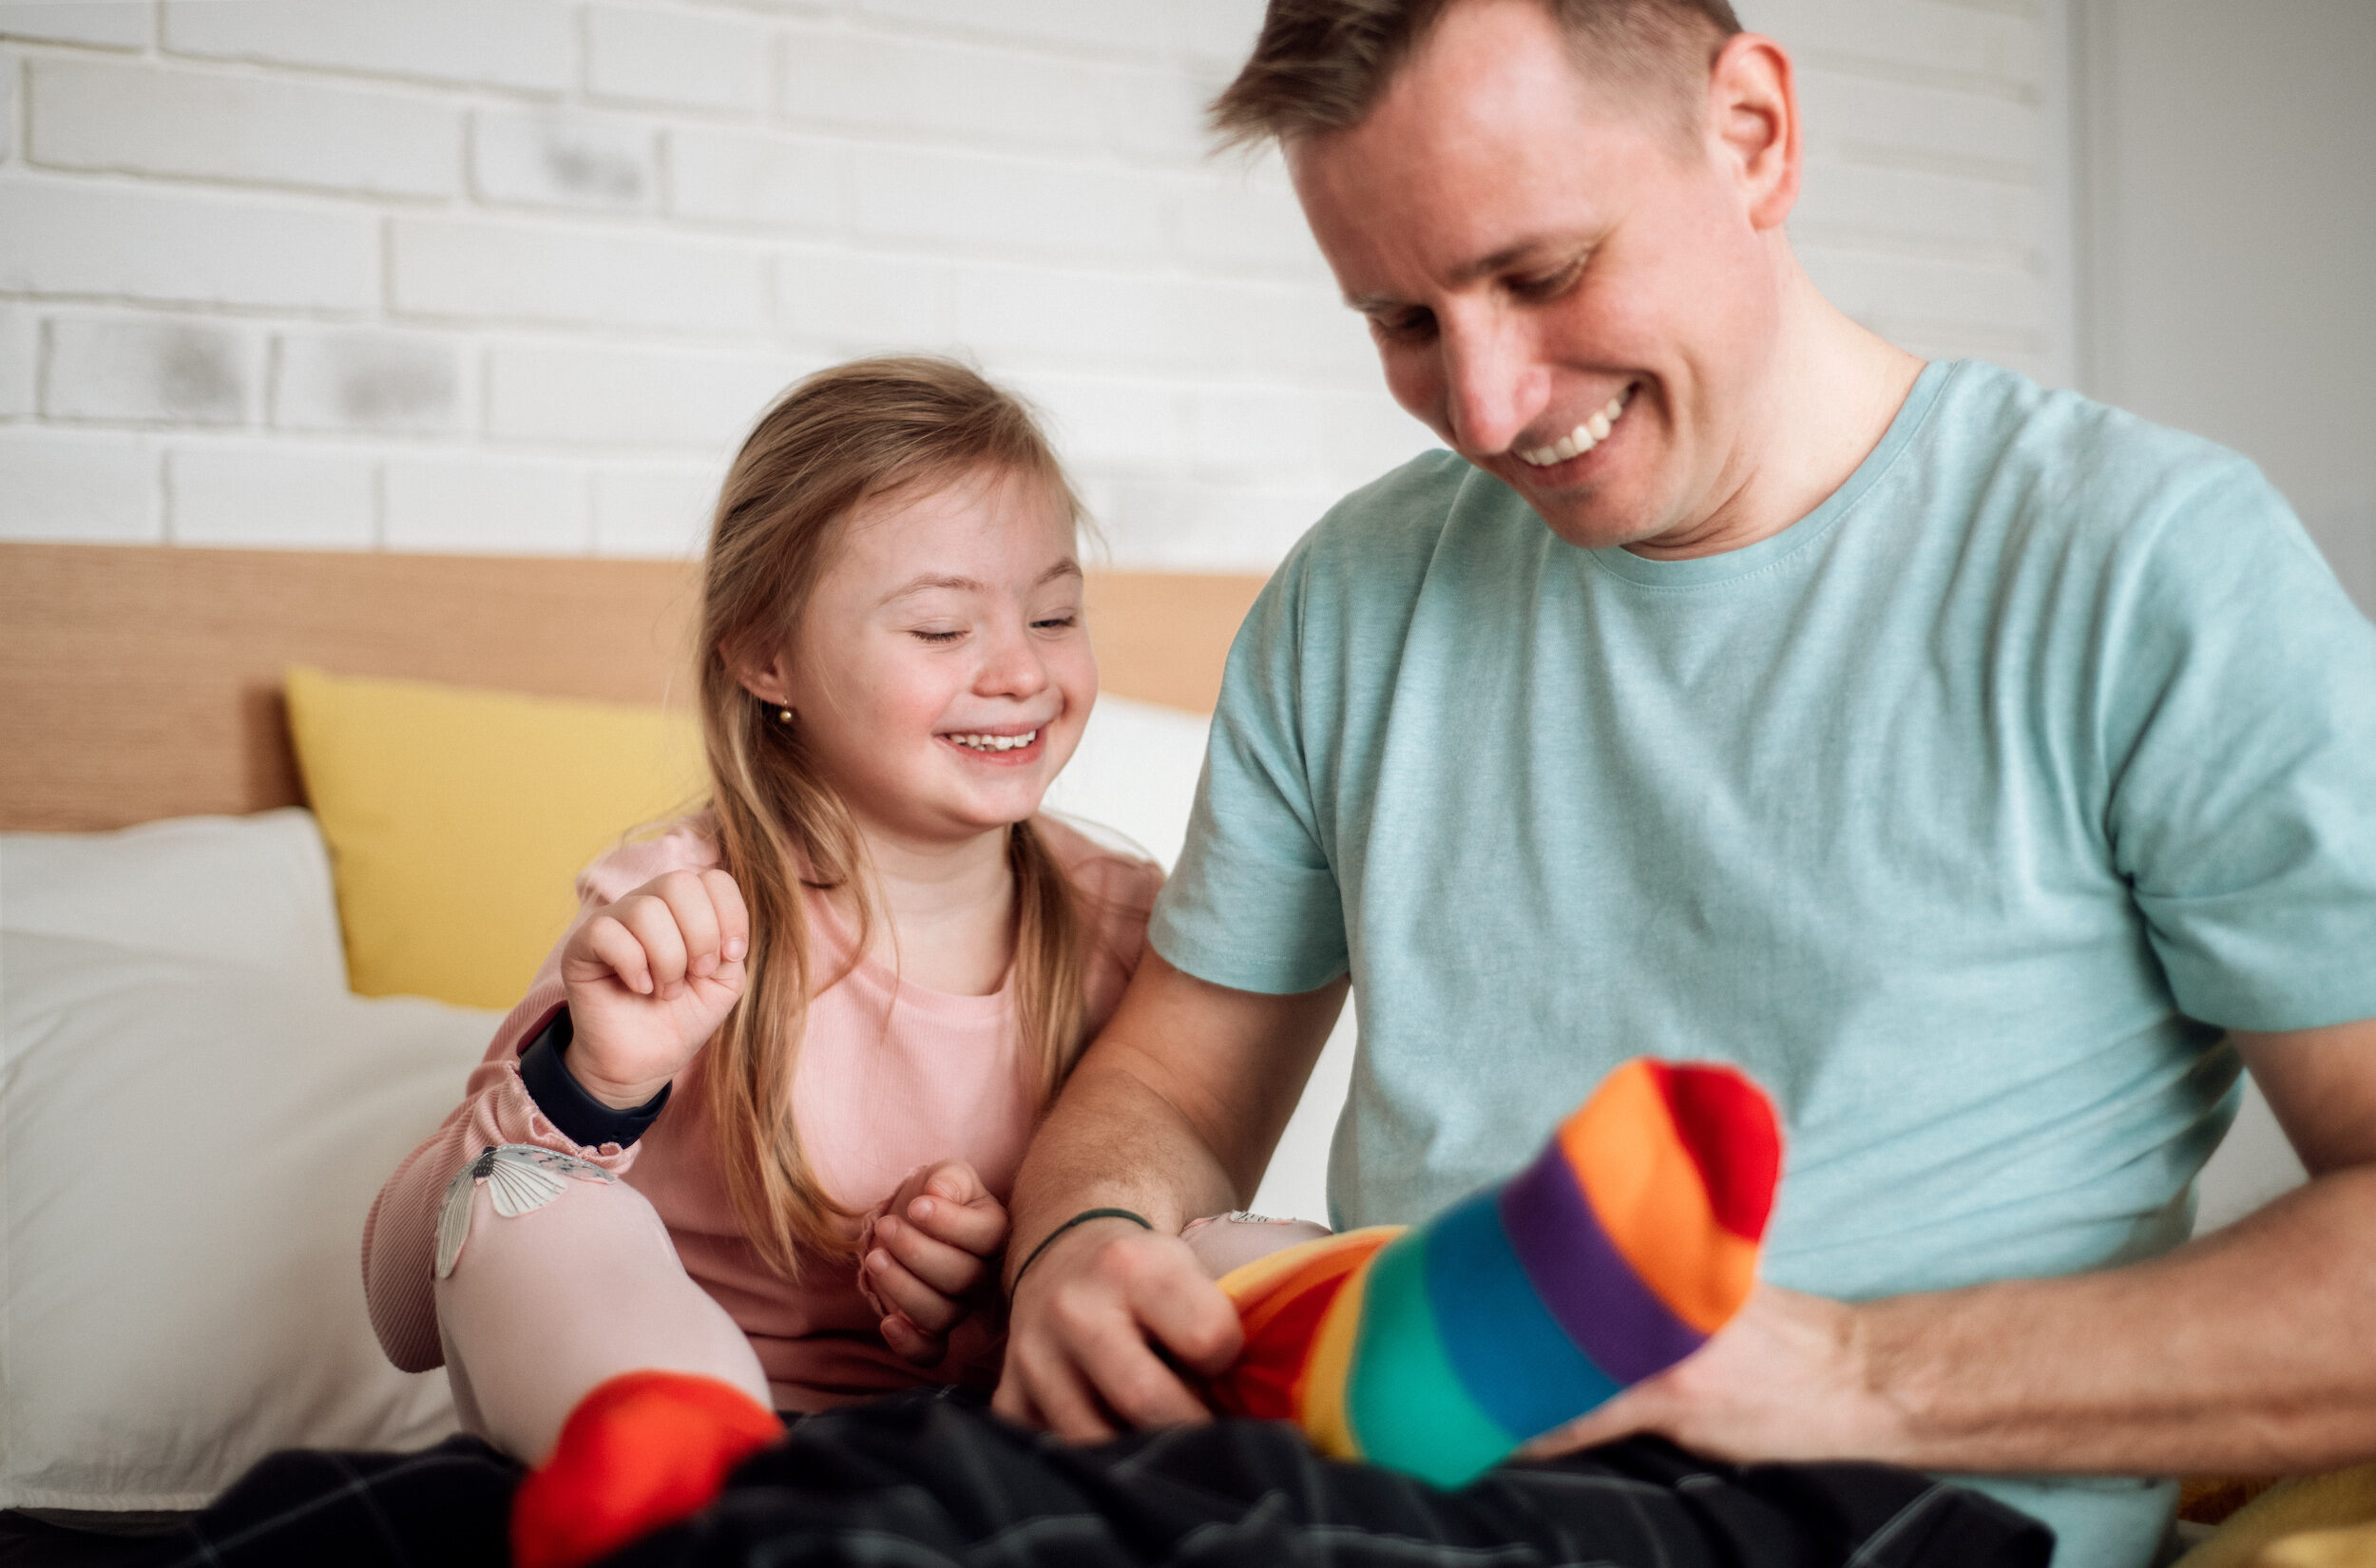 Father putting on different socks to his little daughter with Down syndrome when sitting on bed at home.